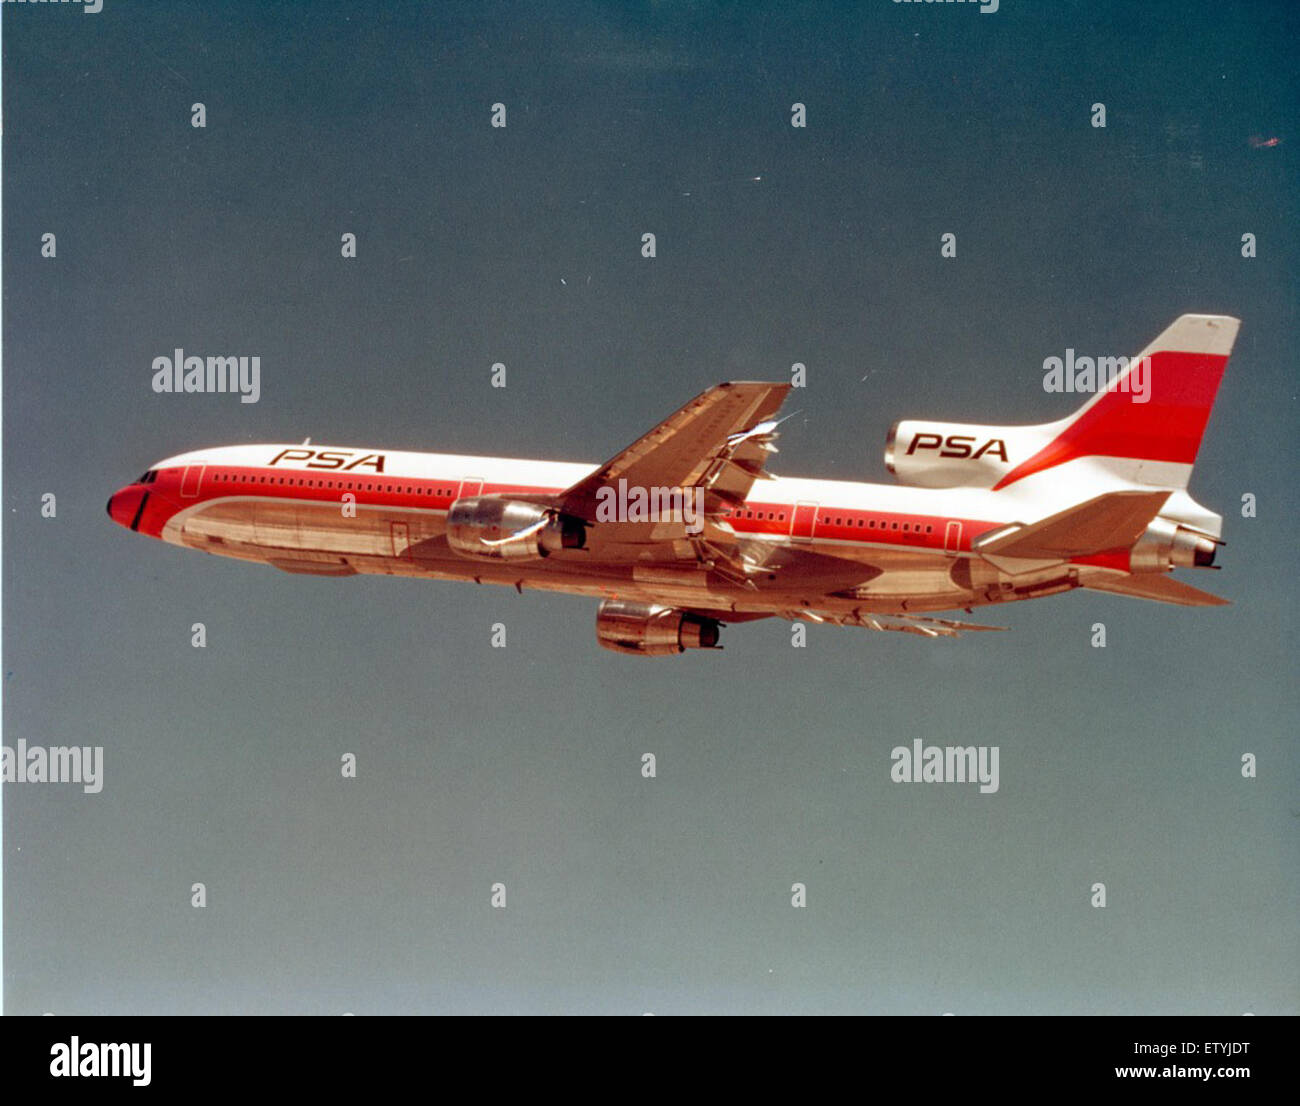 Pacific Southwest Airlines Psa Lockheed L 1011 Stock Photo Alamy